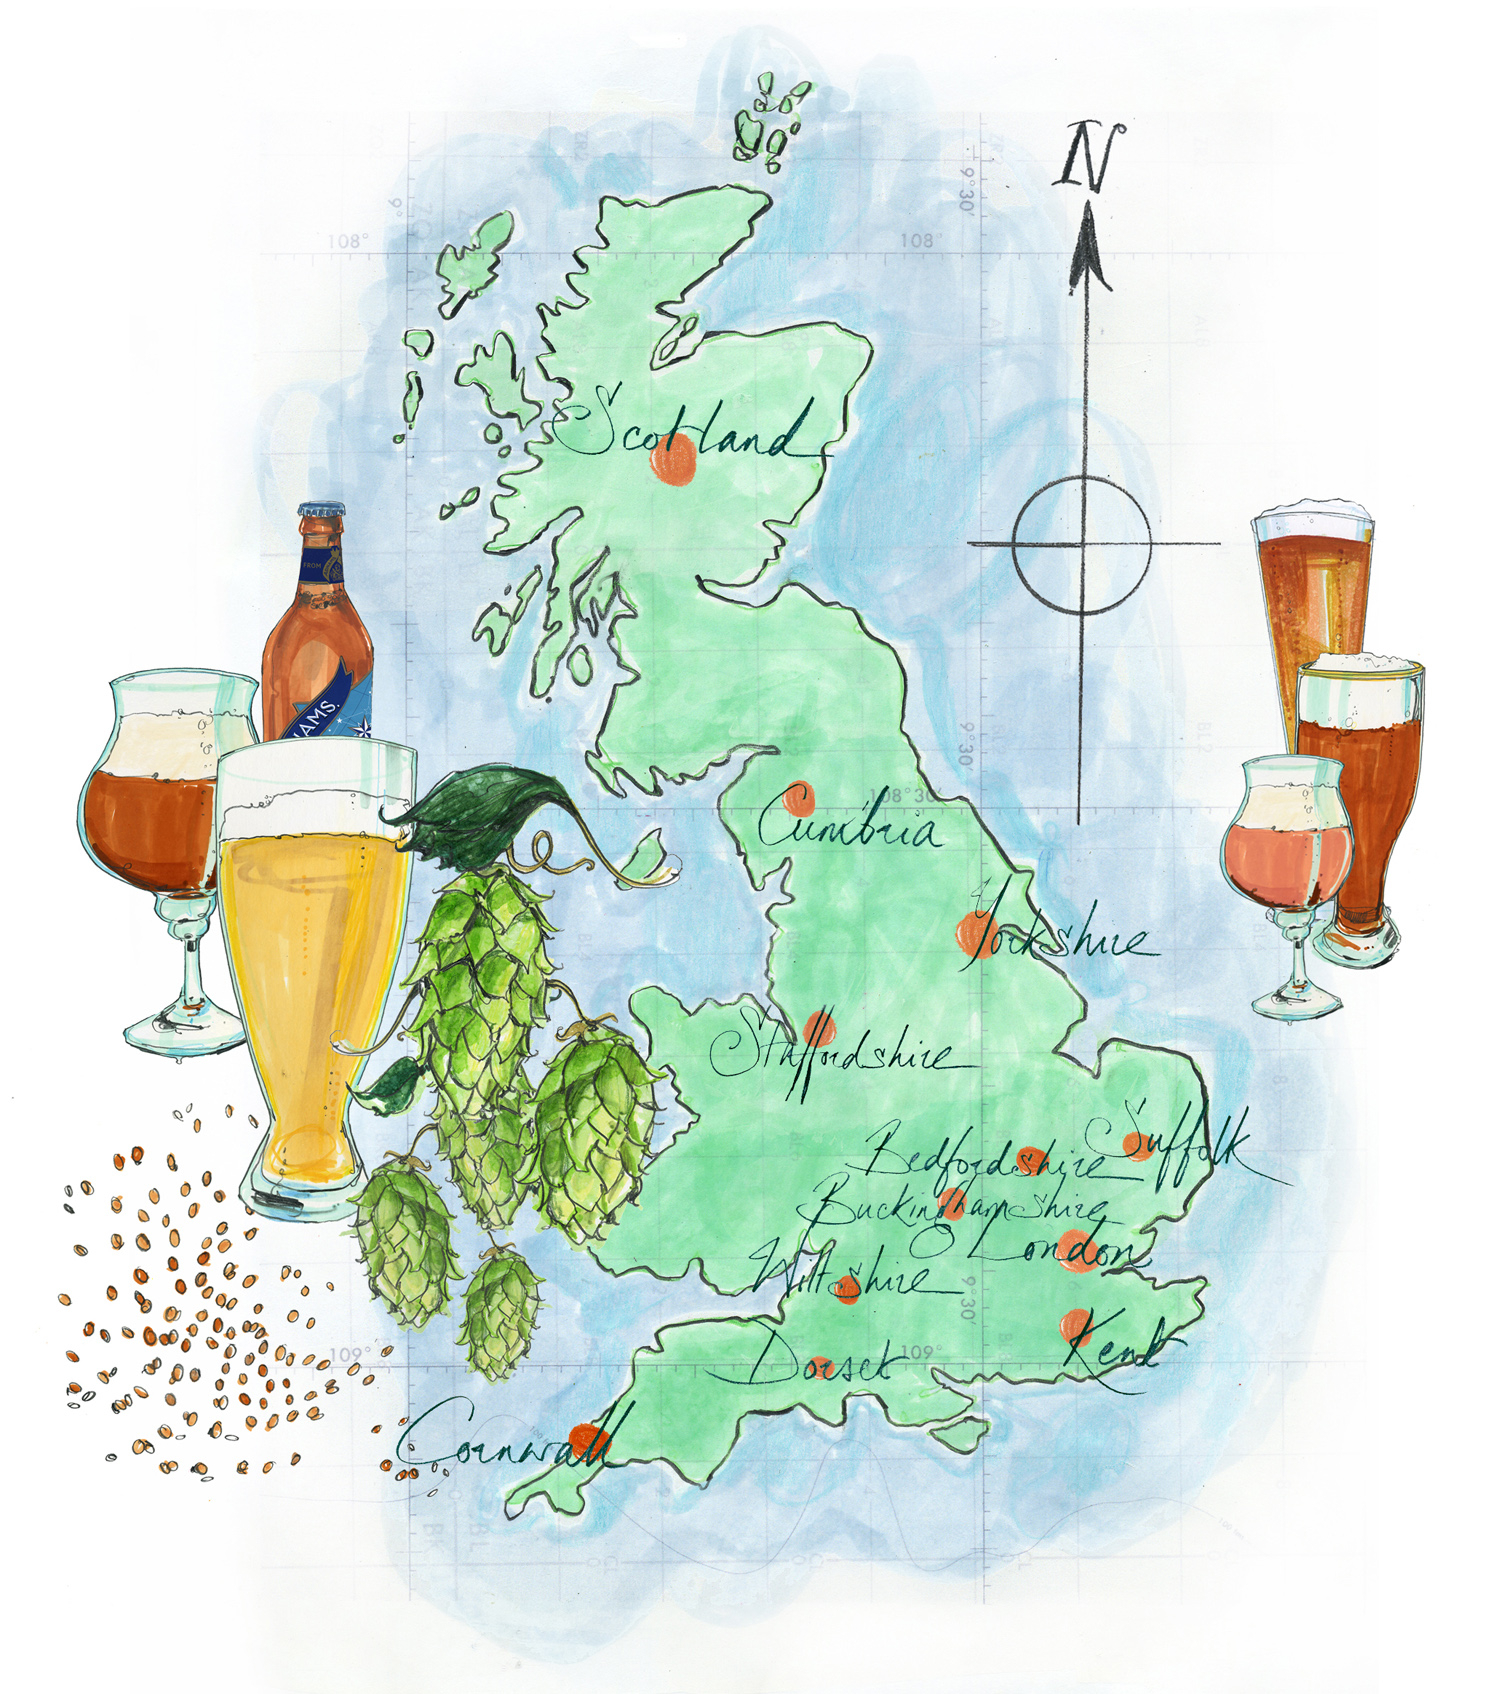 British Beer And Ale Producers Map / Waitrose Food Illustrated